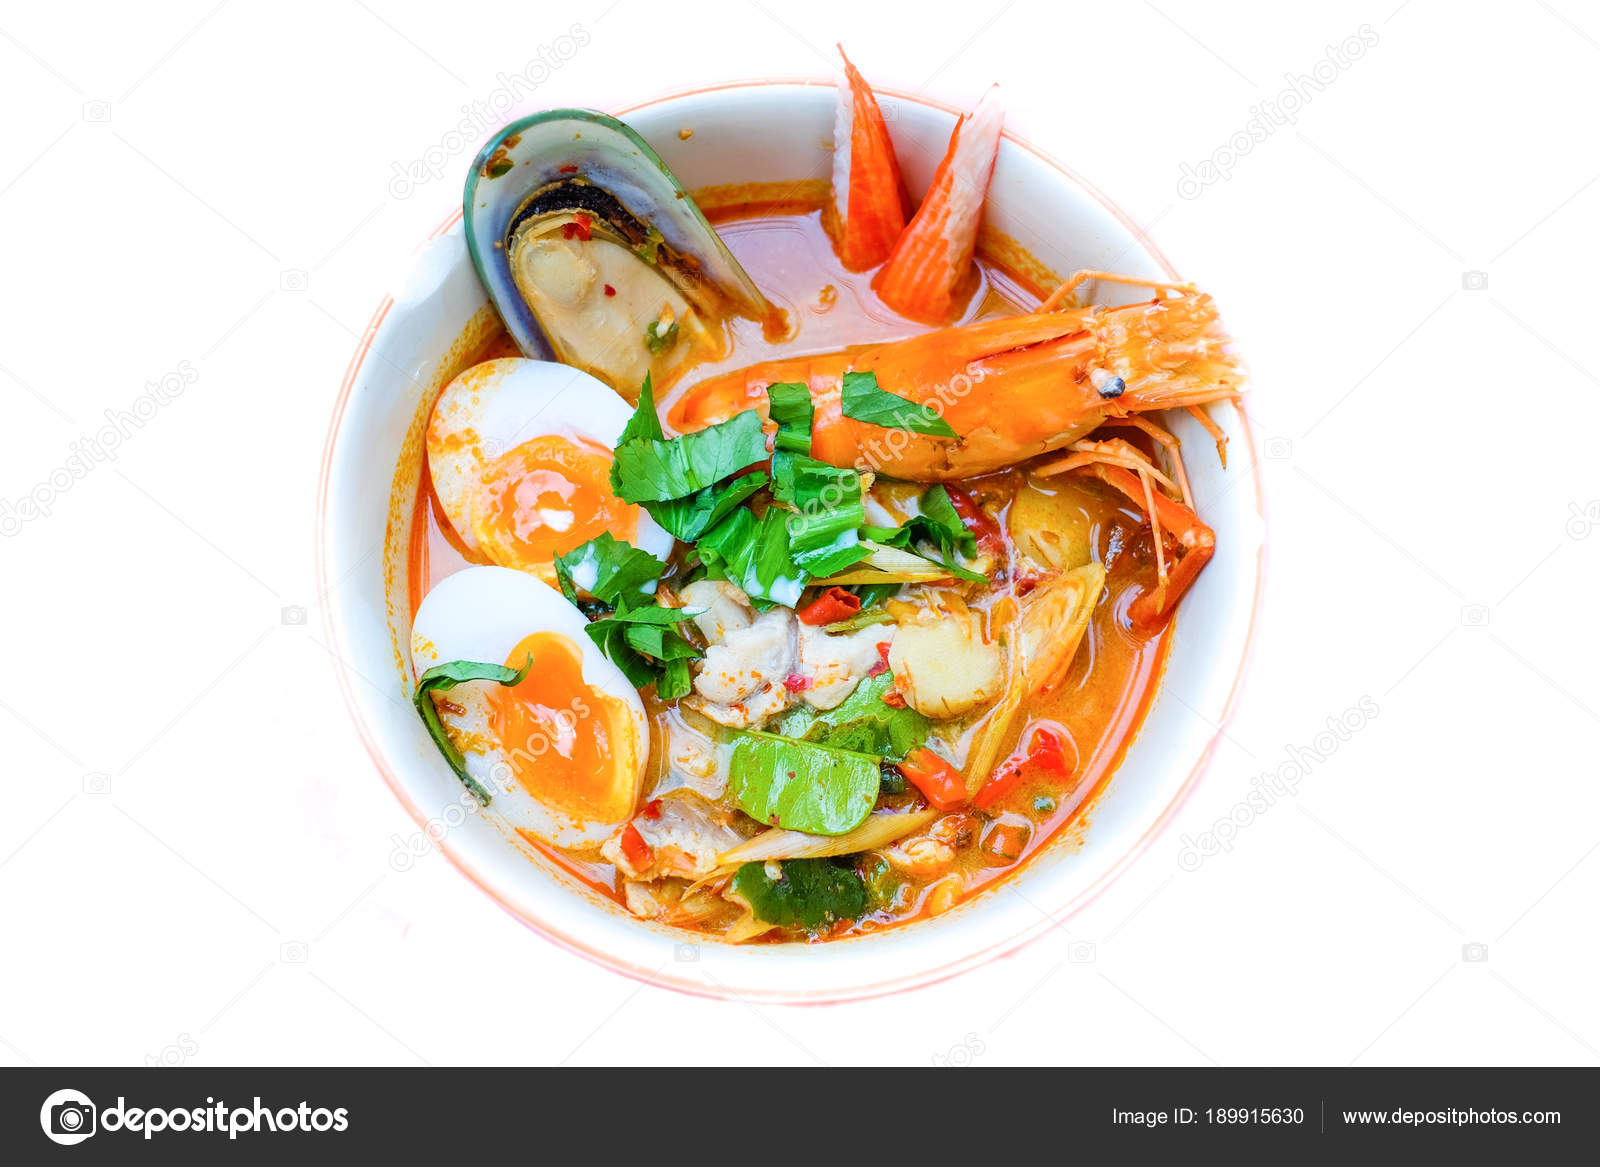 Thai Noodle Soup Tom Yum Soup Recipe With Shrimp Dumpling Fish New Zealand Mussels Crab And